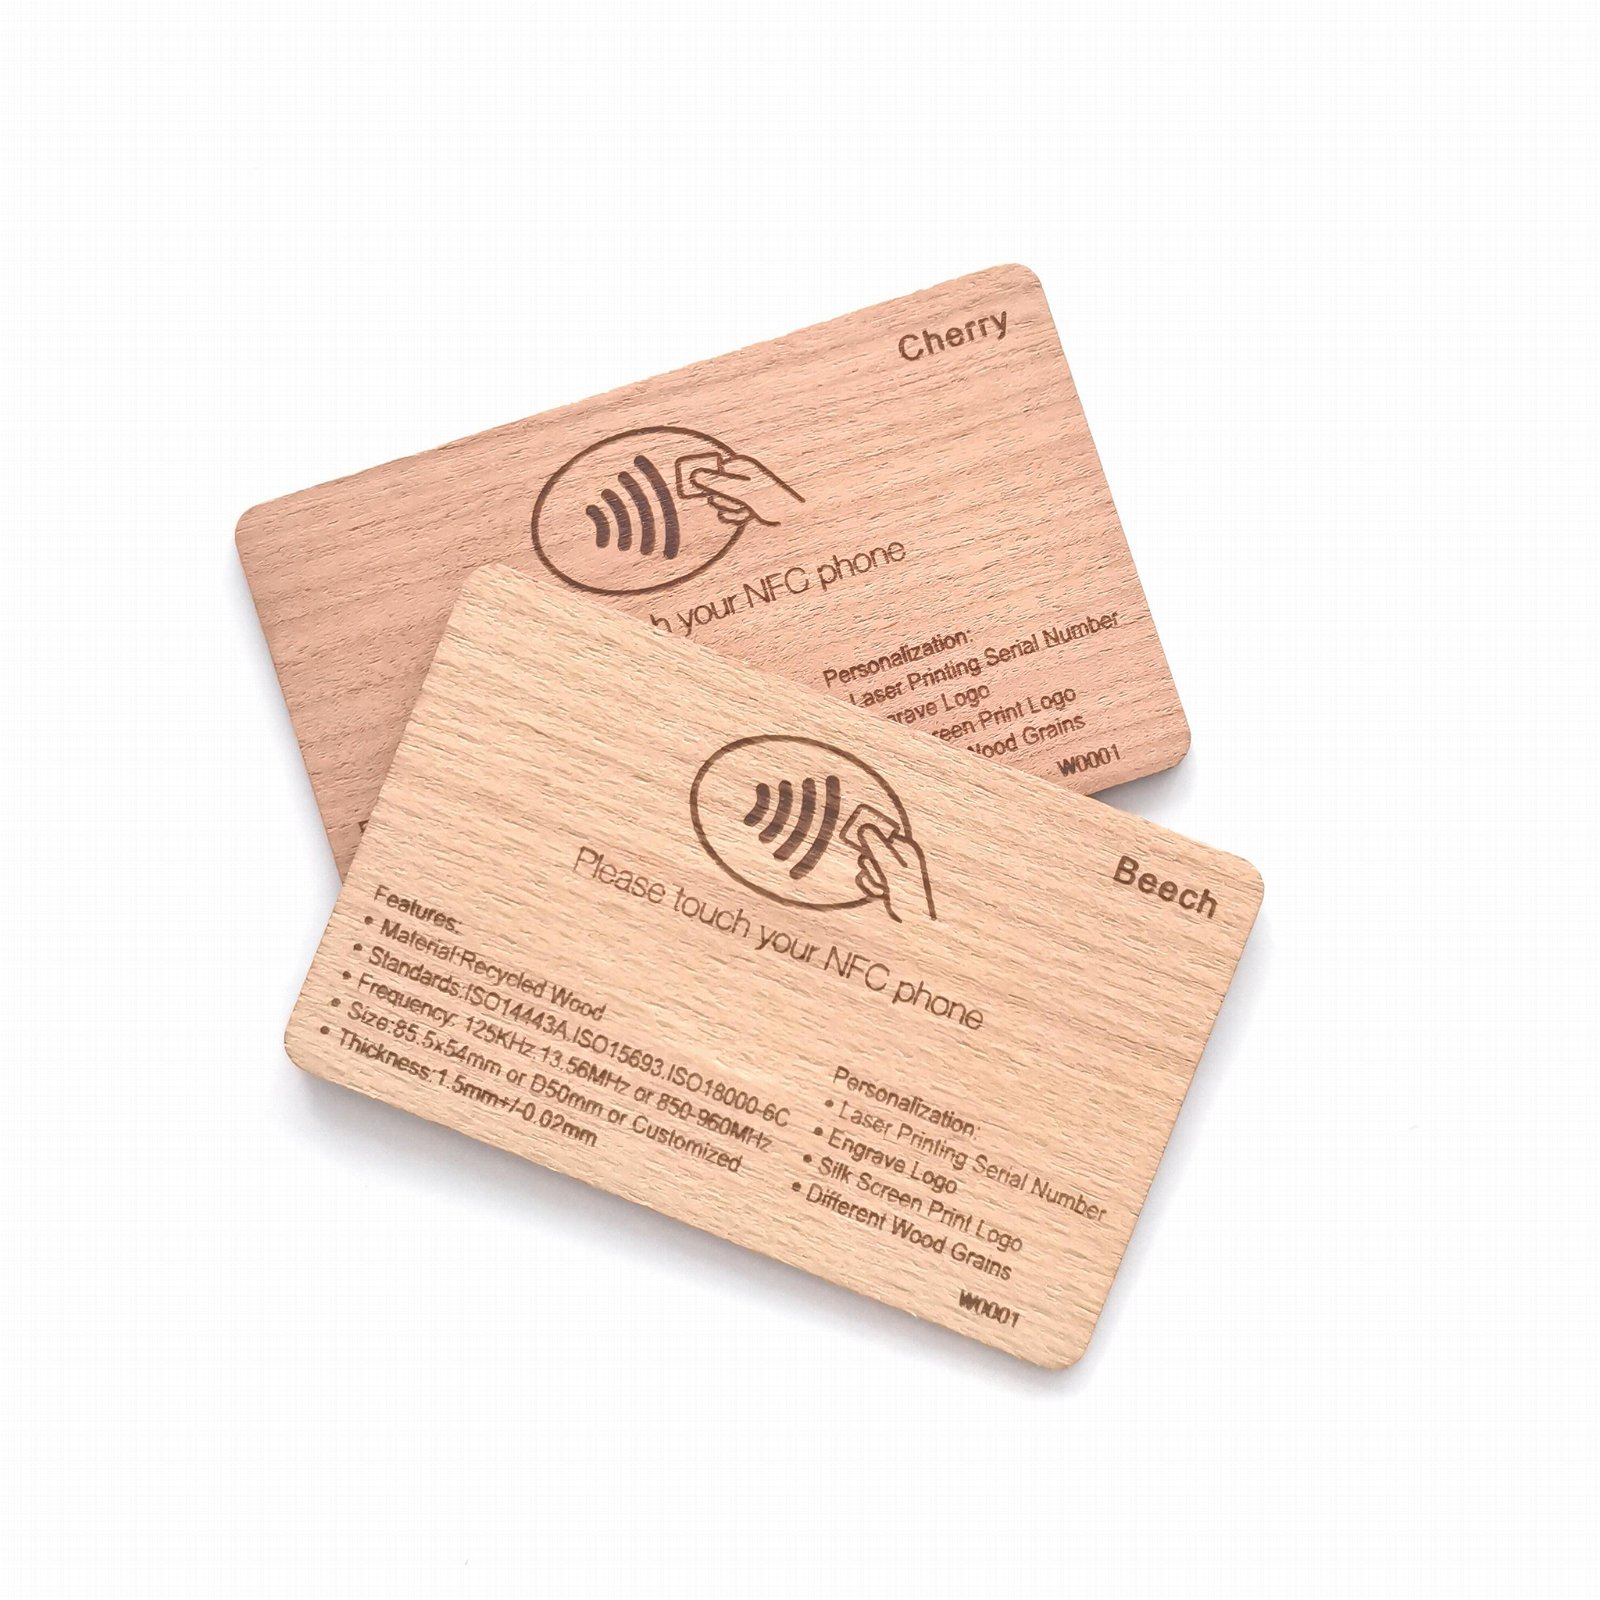 NFC wooden hotel key card RFID ISO14443A Smart NTAG213/216  2